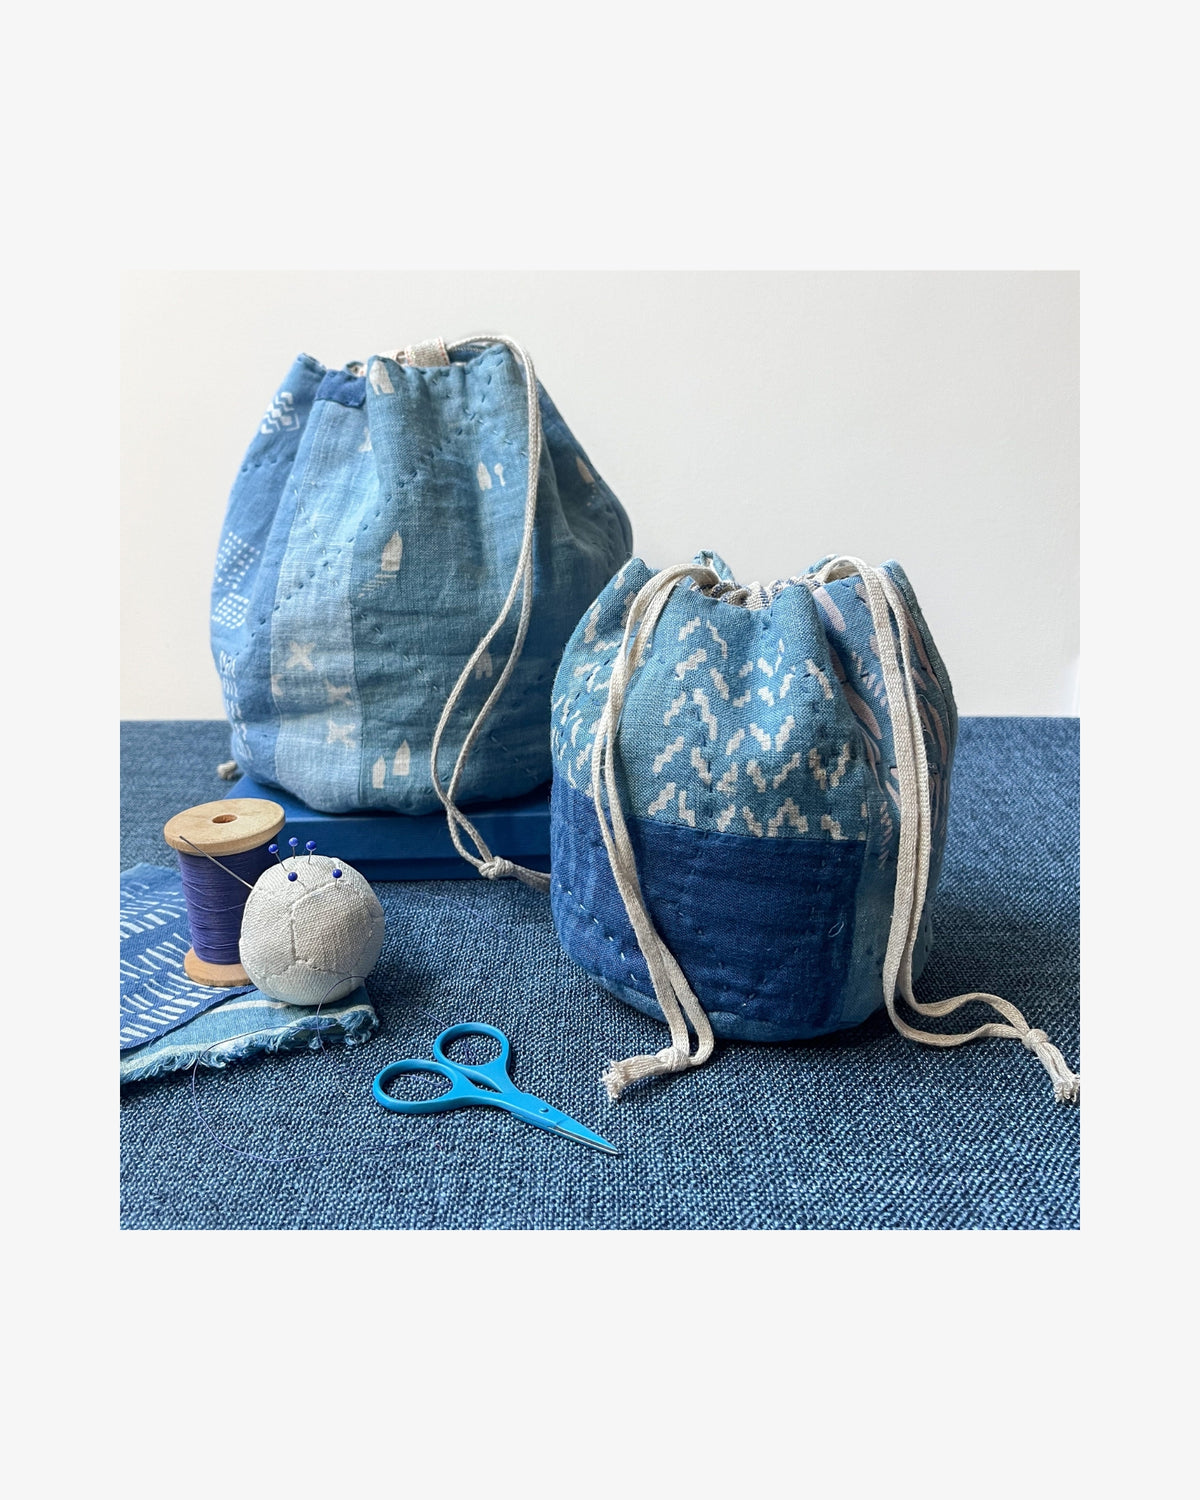 Hand-Stitched Quilted Drawstring Bag Class